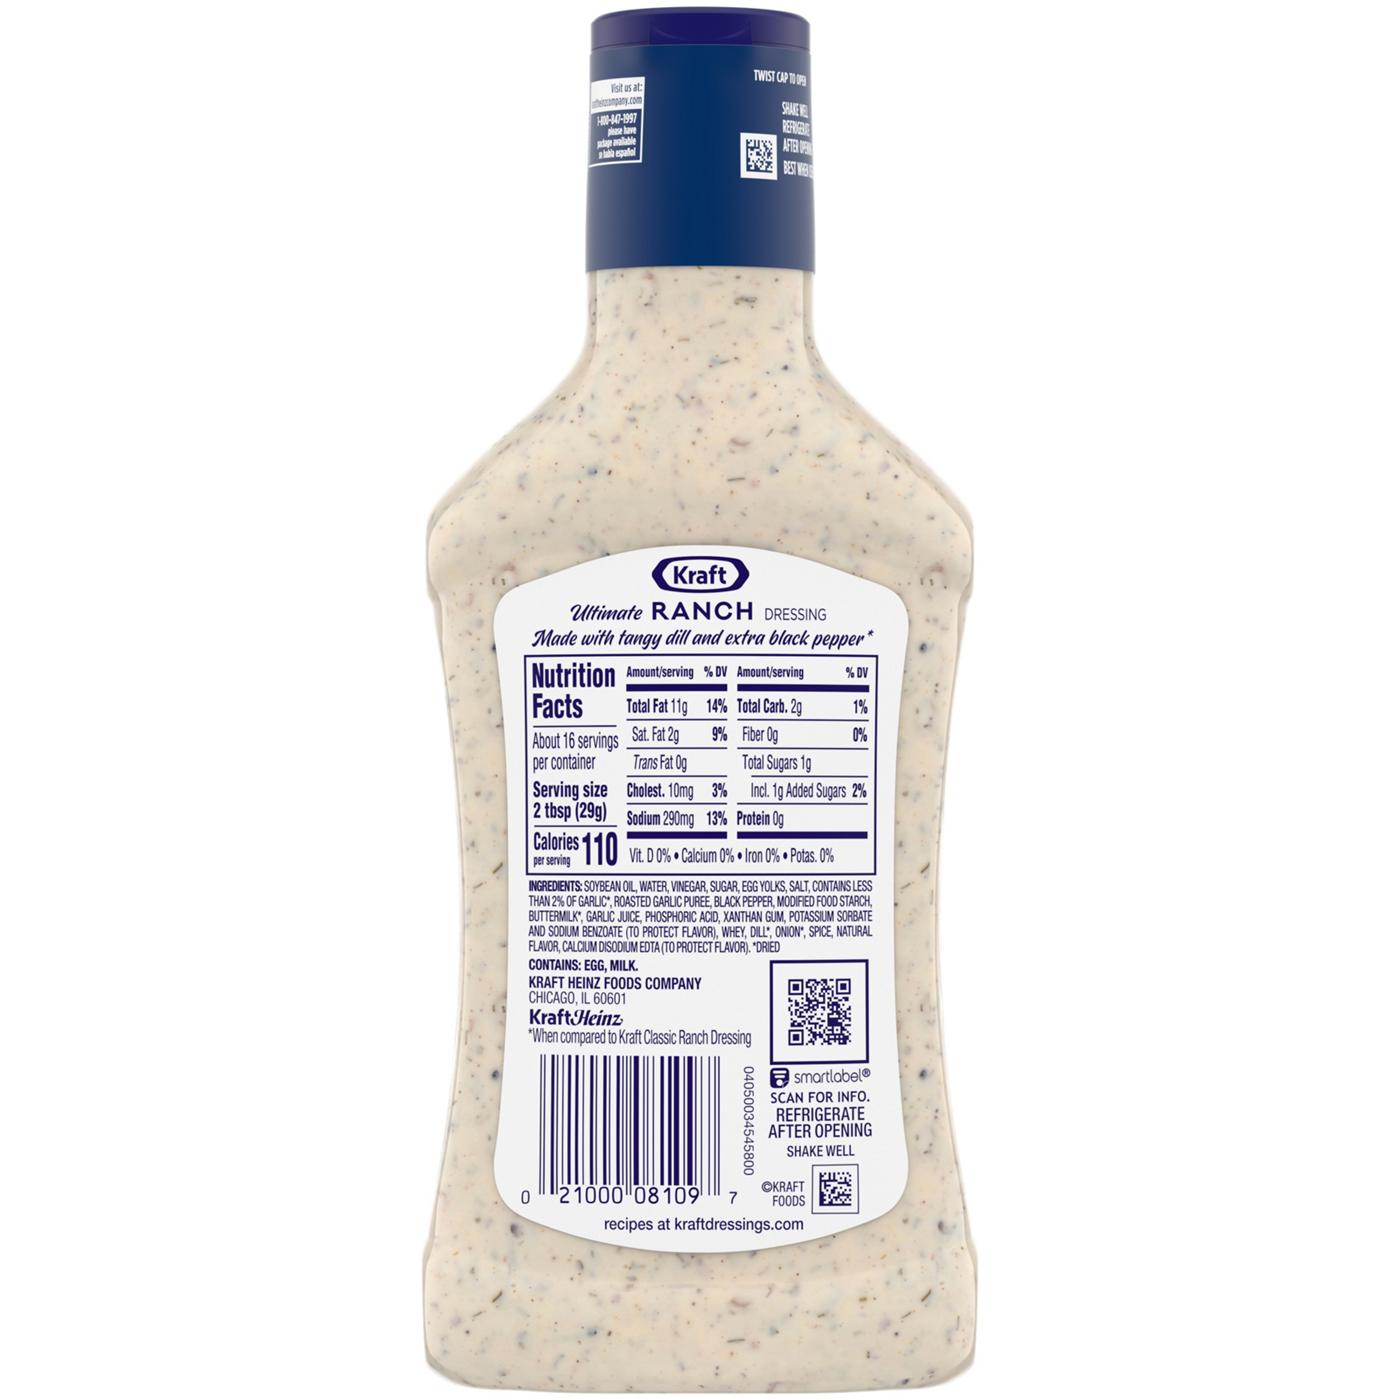 Kraft Deluxe Salad Dressing - Ultimate Ranch; image 2 of 2